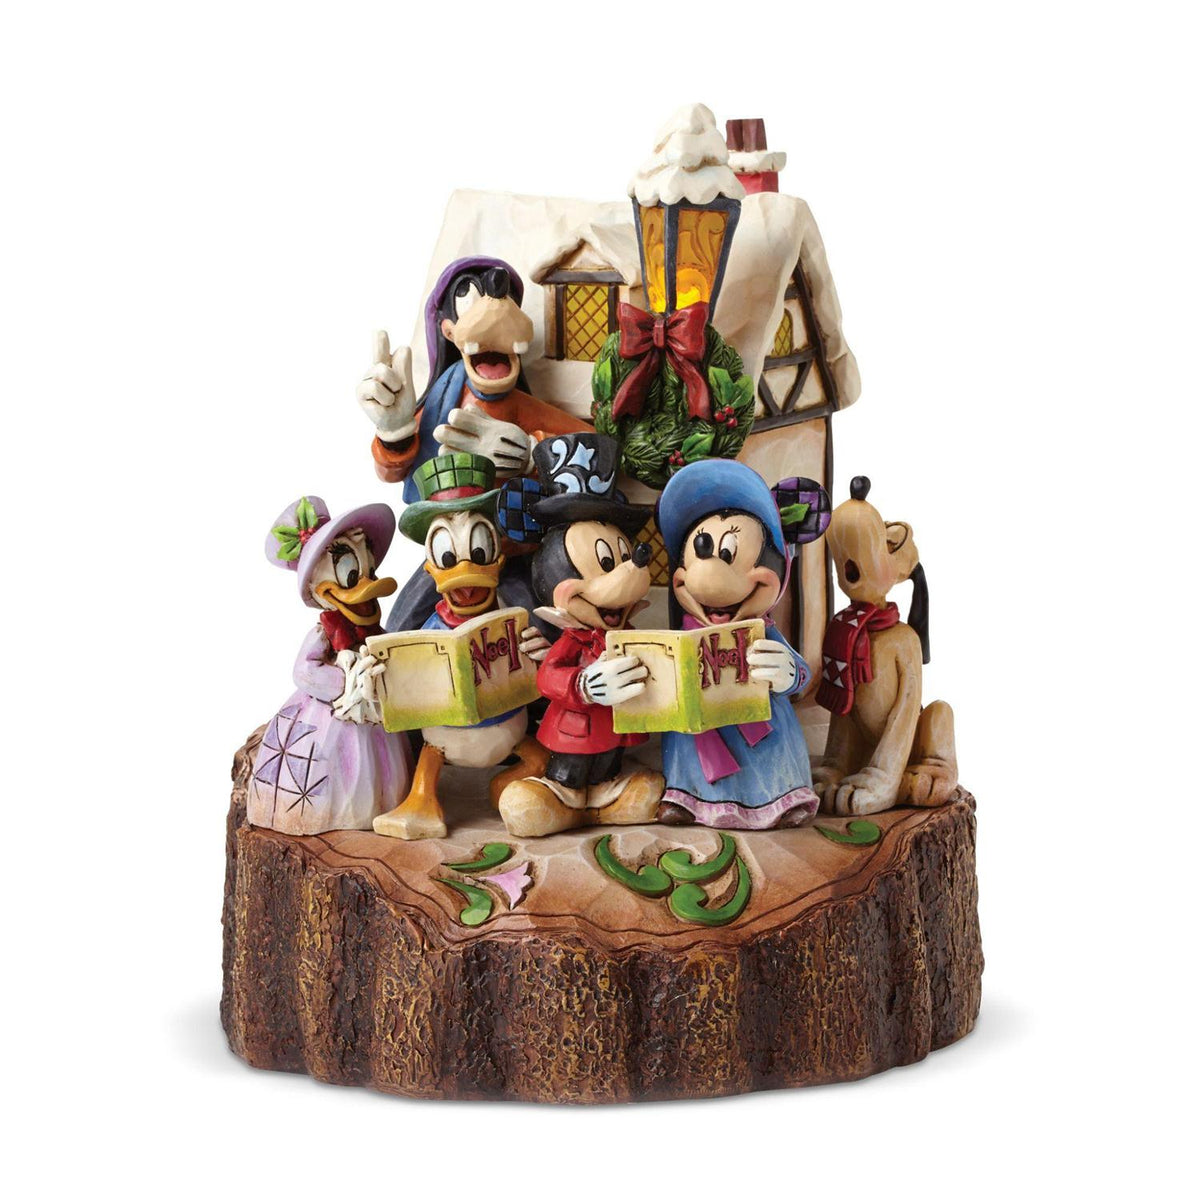 Caroling Carved by Heart Disney Traditions Statue by Enesco -Enesco - India - www.superherotoystore.com